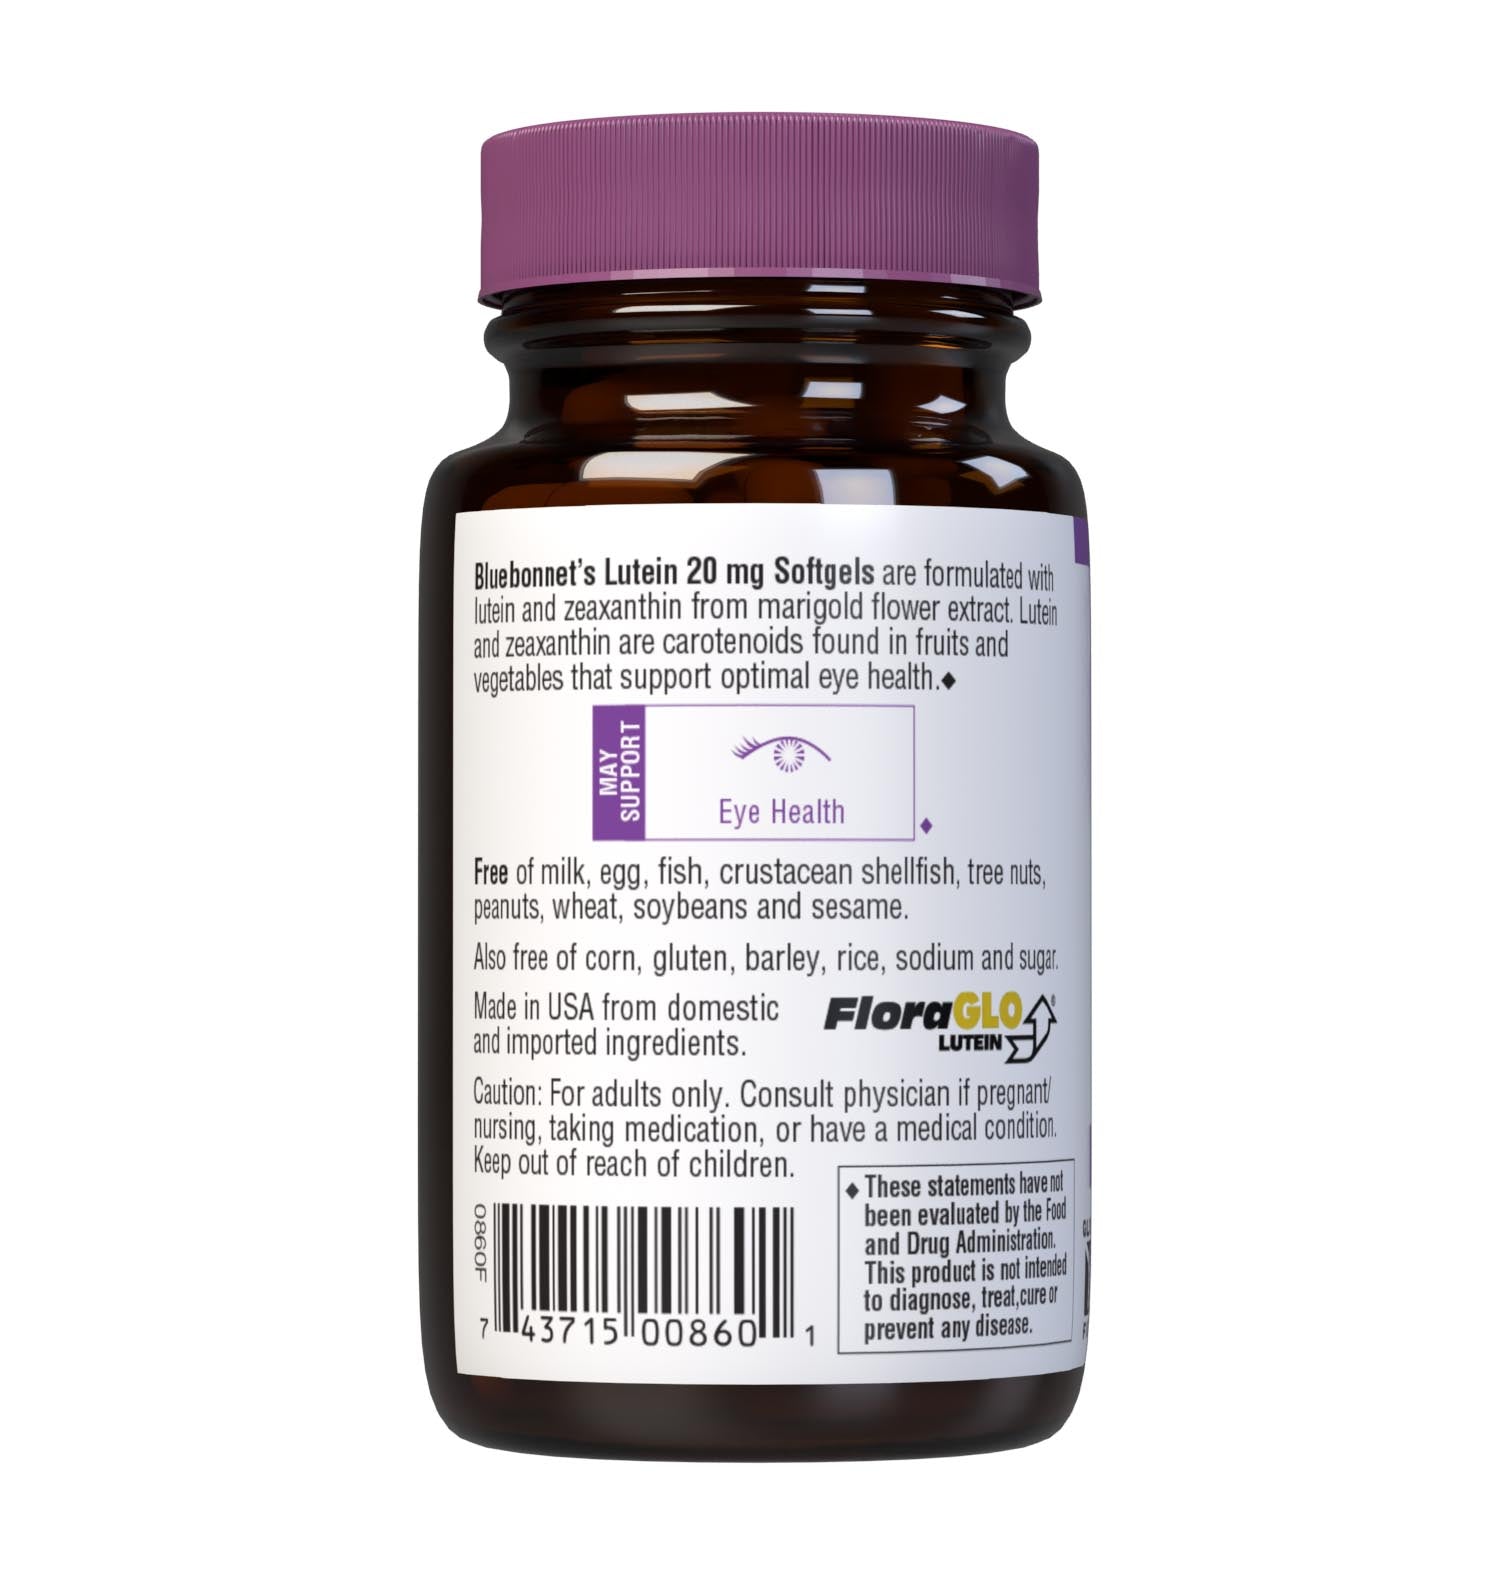 Bluebonnet’s Lutein 20 mg 30 Softgels are formulated with lutein and zeaxanthin from marigold flower extract. Lutein and zeaxanthin are carotenoids found in fruits and vegetables that support optimal eye health. Description panel. #size_30 count